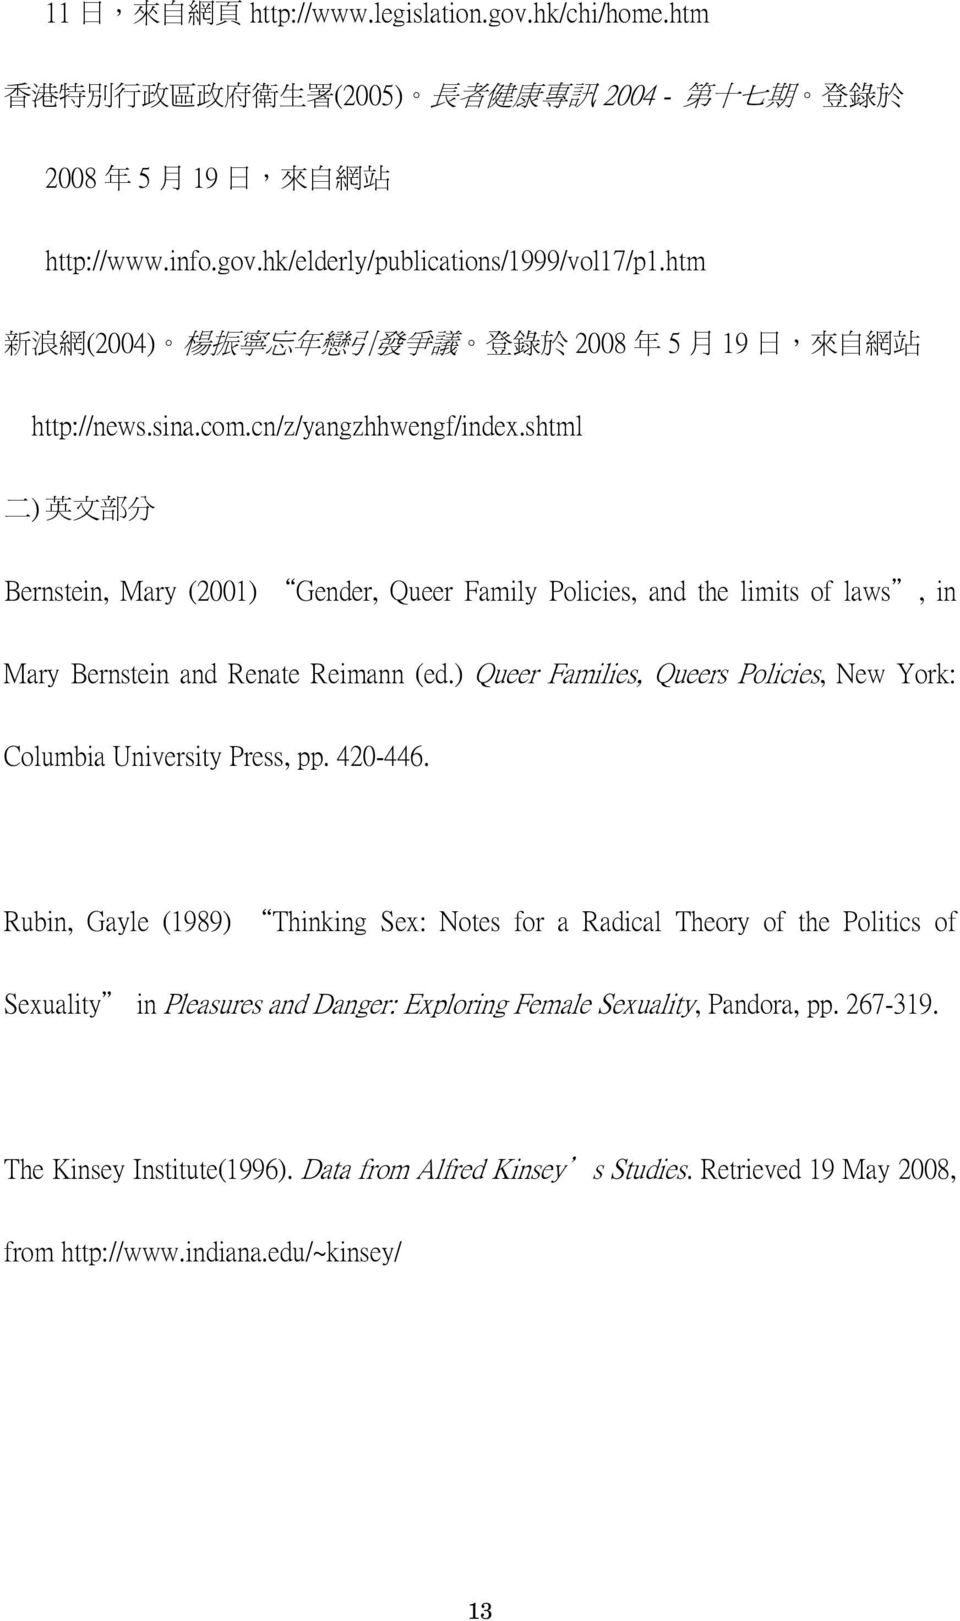 shtml 二 ) 英 文 部 分 Bernstein, Mary (2001) Gender, Queer Family Policies, and the limits of laws", in Mary Bernstein and Renate Reimann (ed.